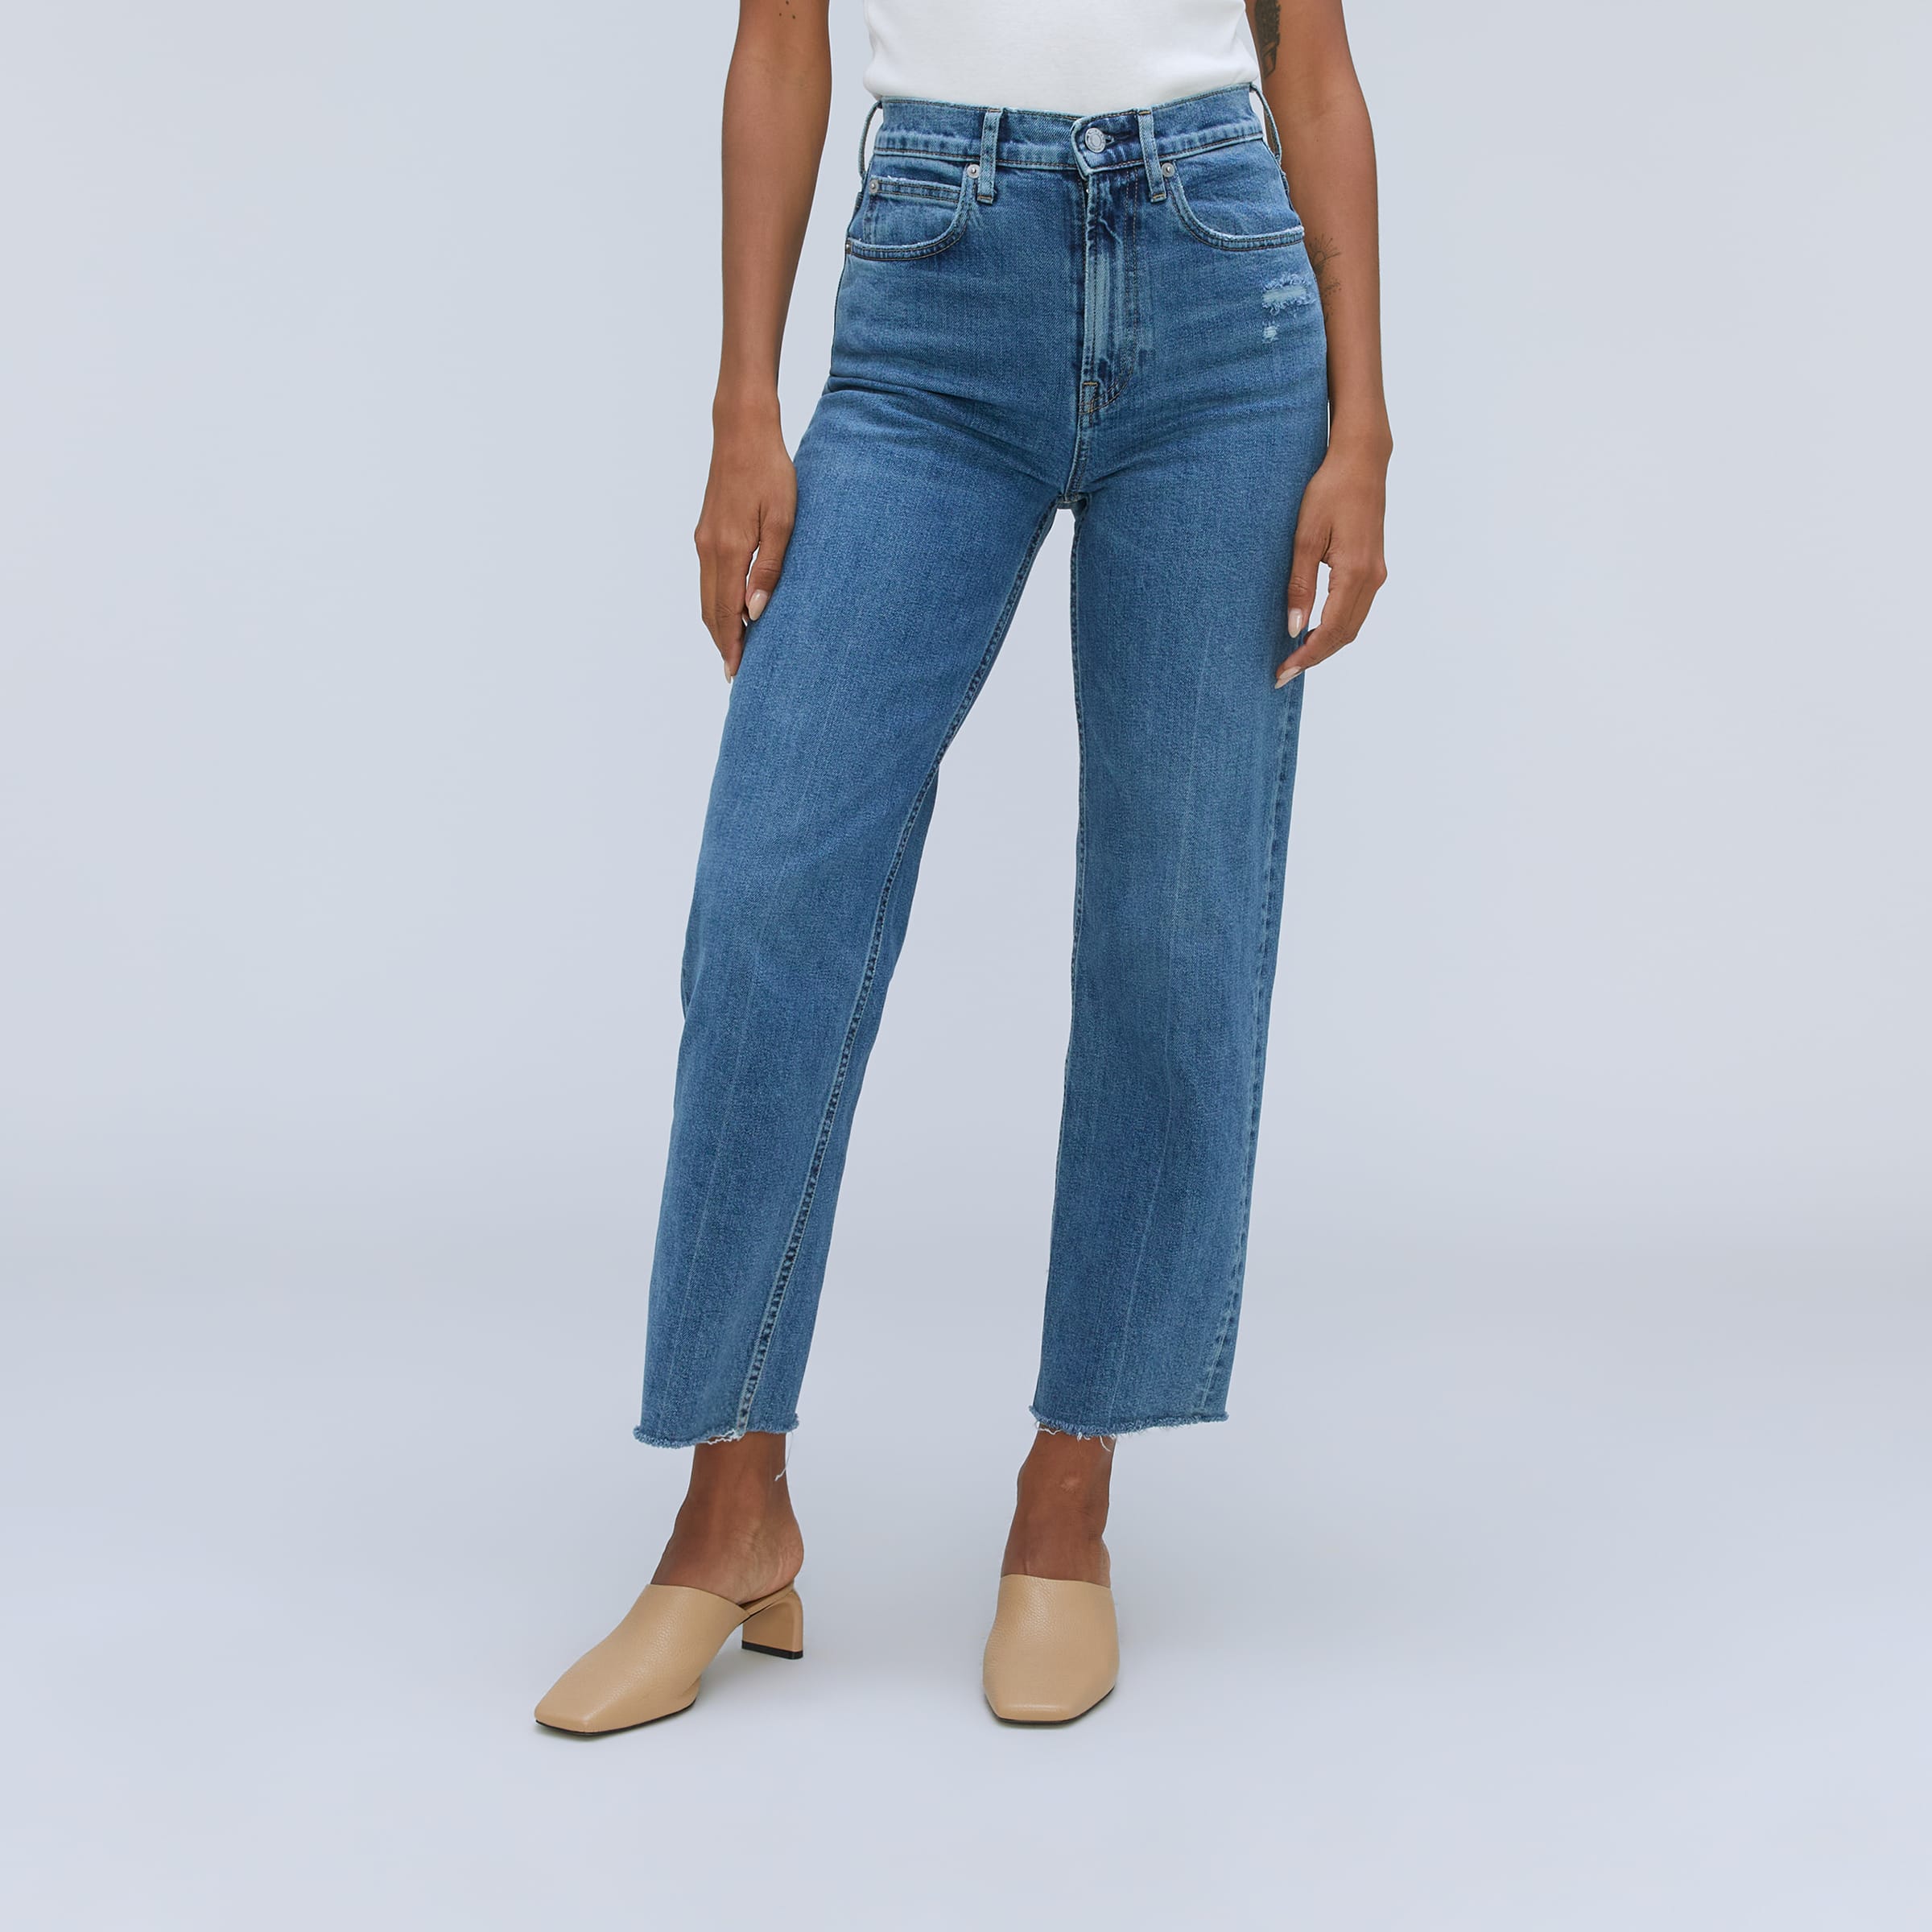 High Rise Jeans for Fupa